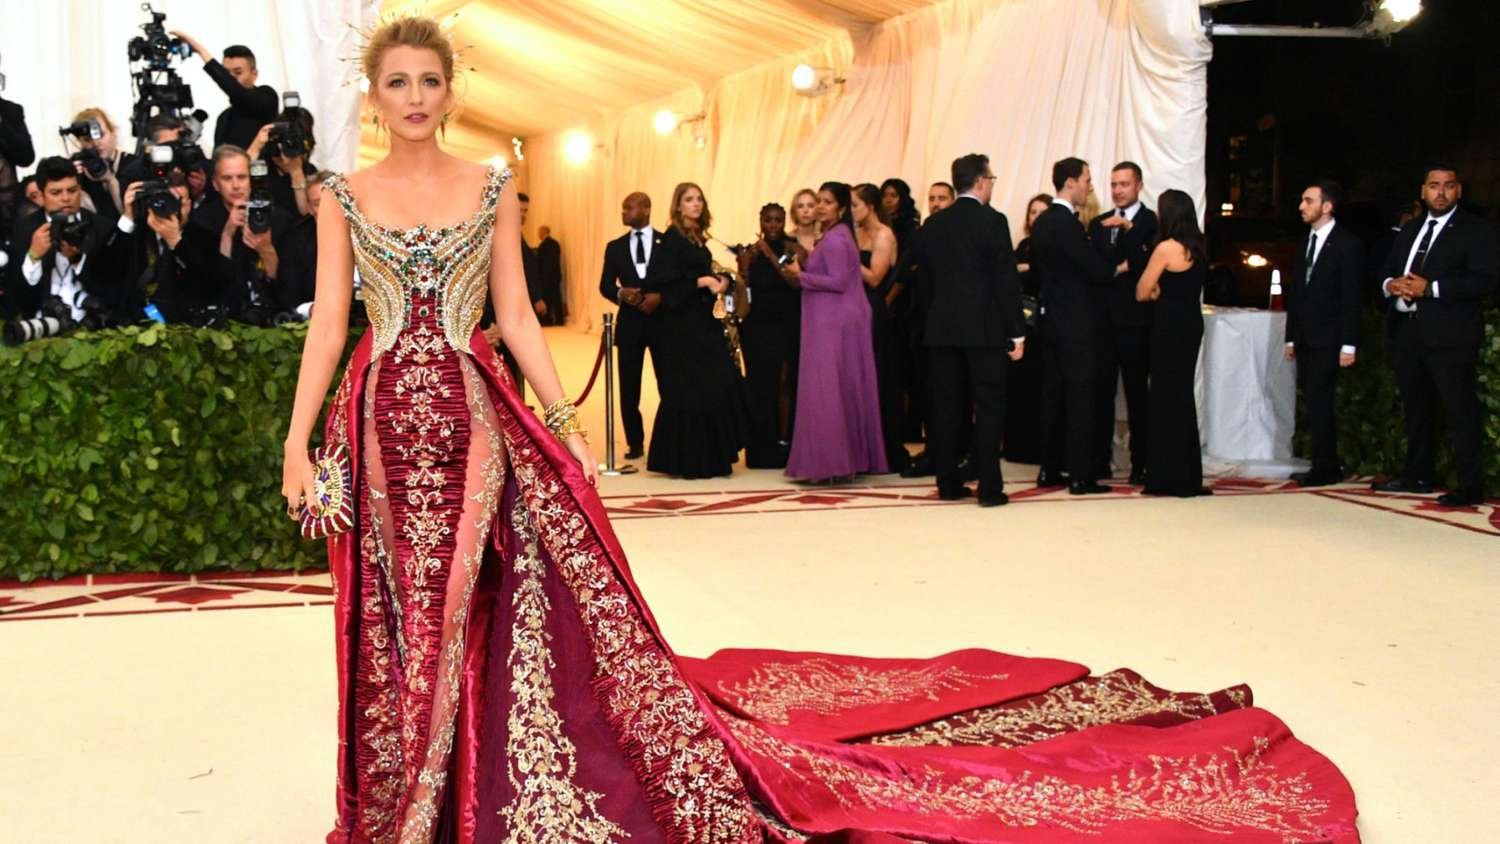 The Best Met Gala Looks of All Time!